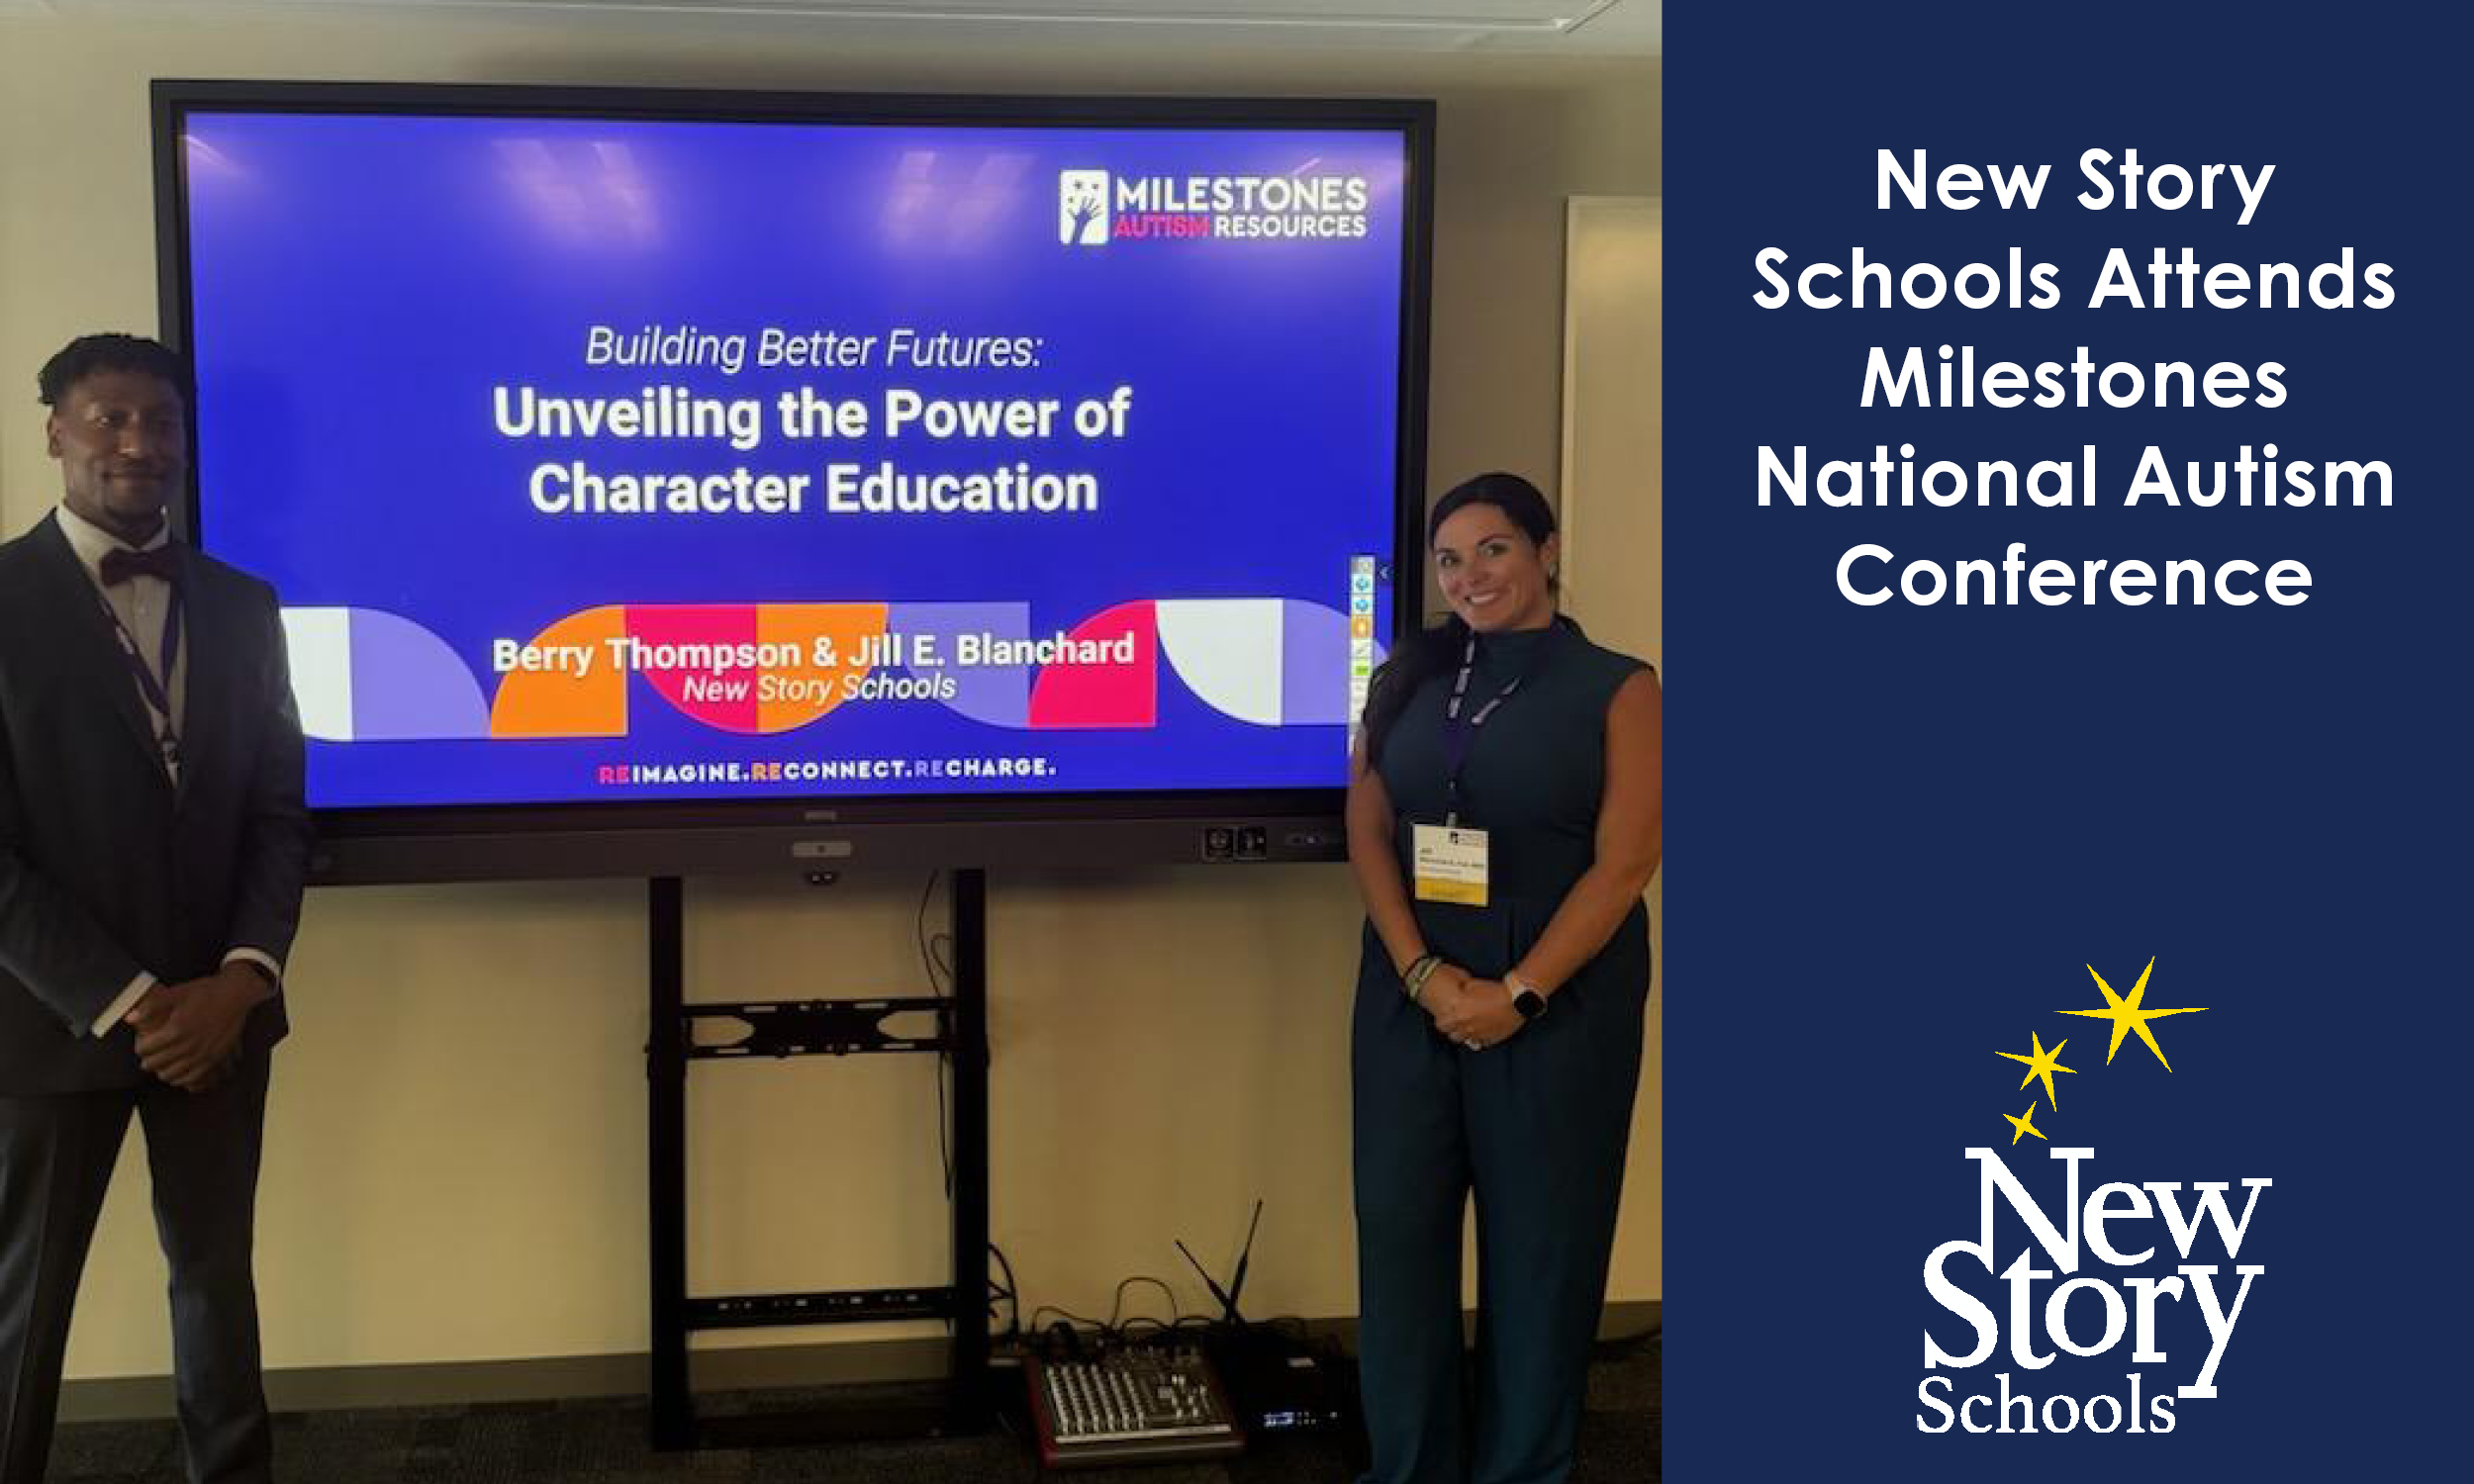 New Story Schools Attends Milestones National Autism Conference